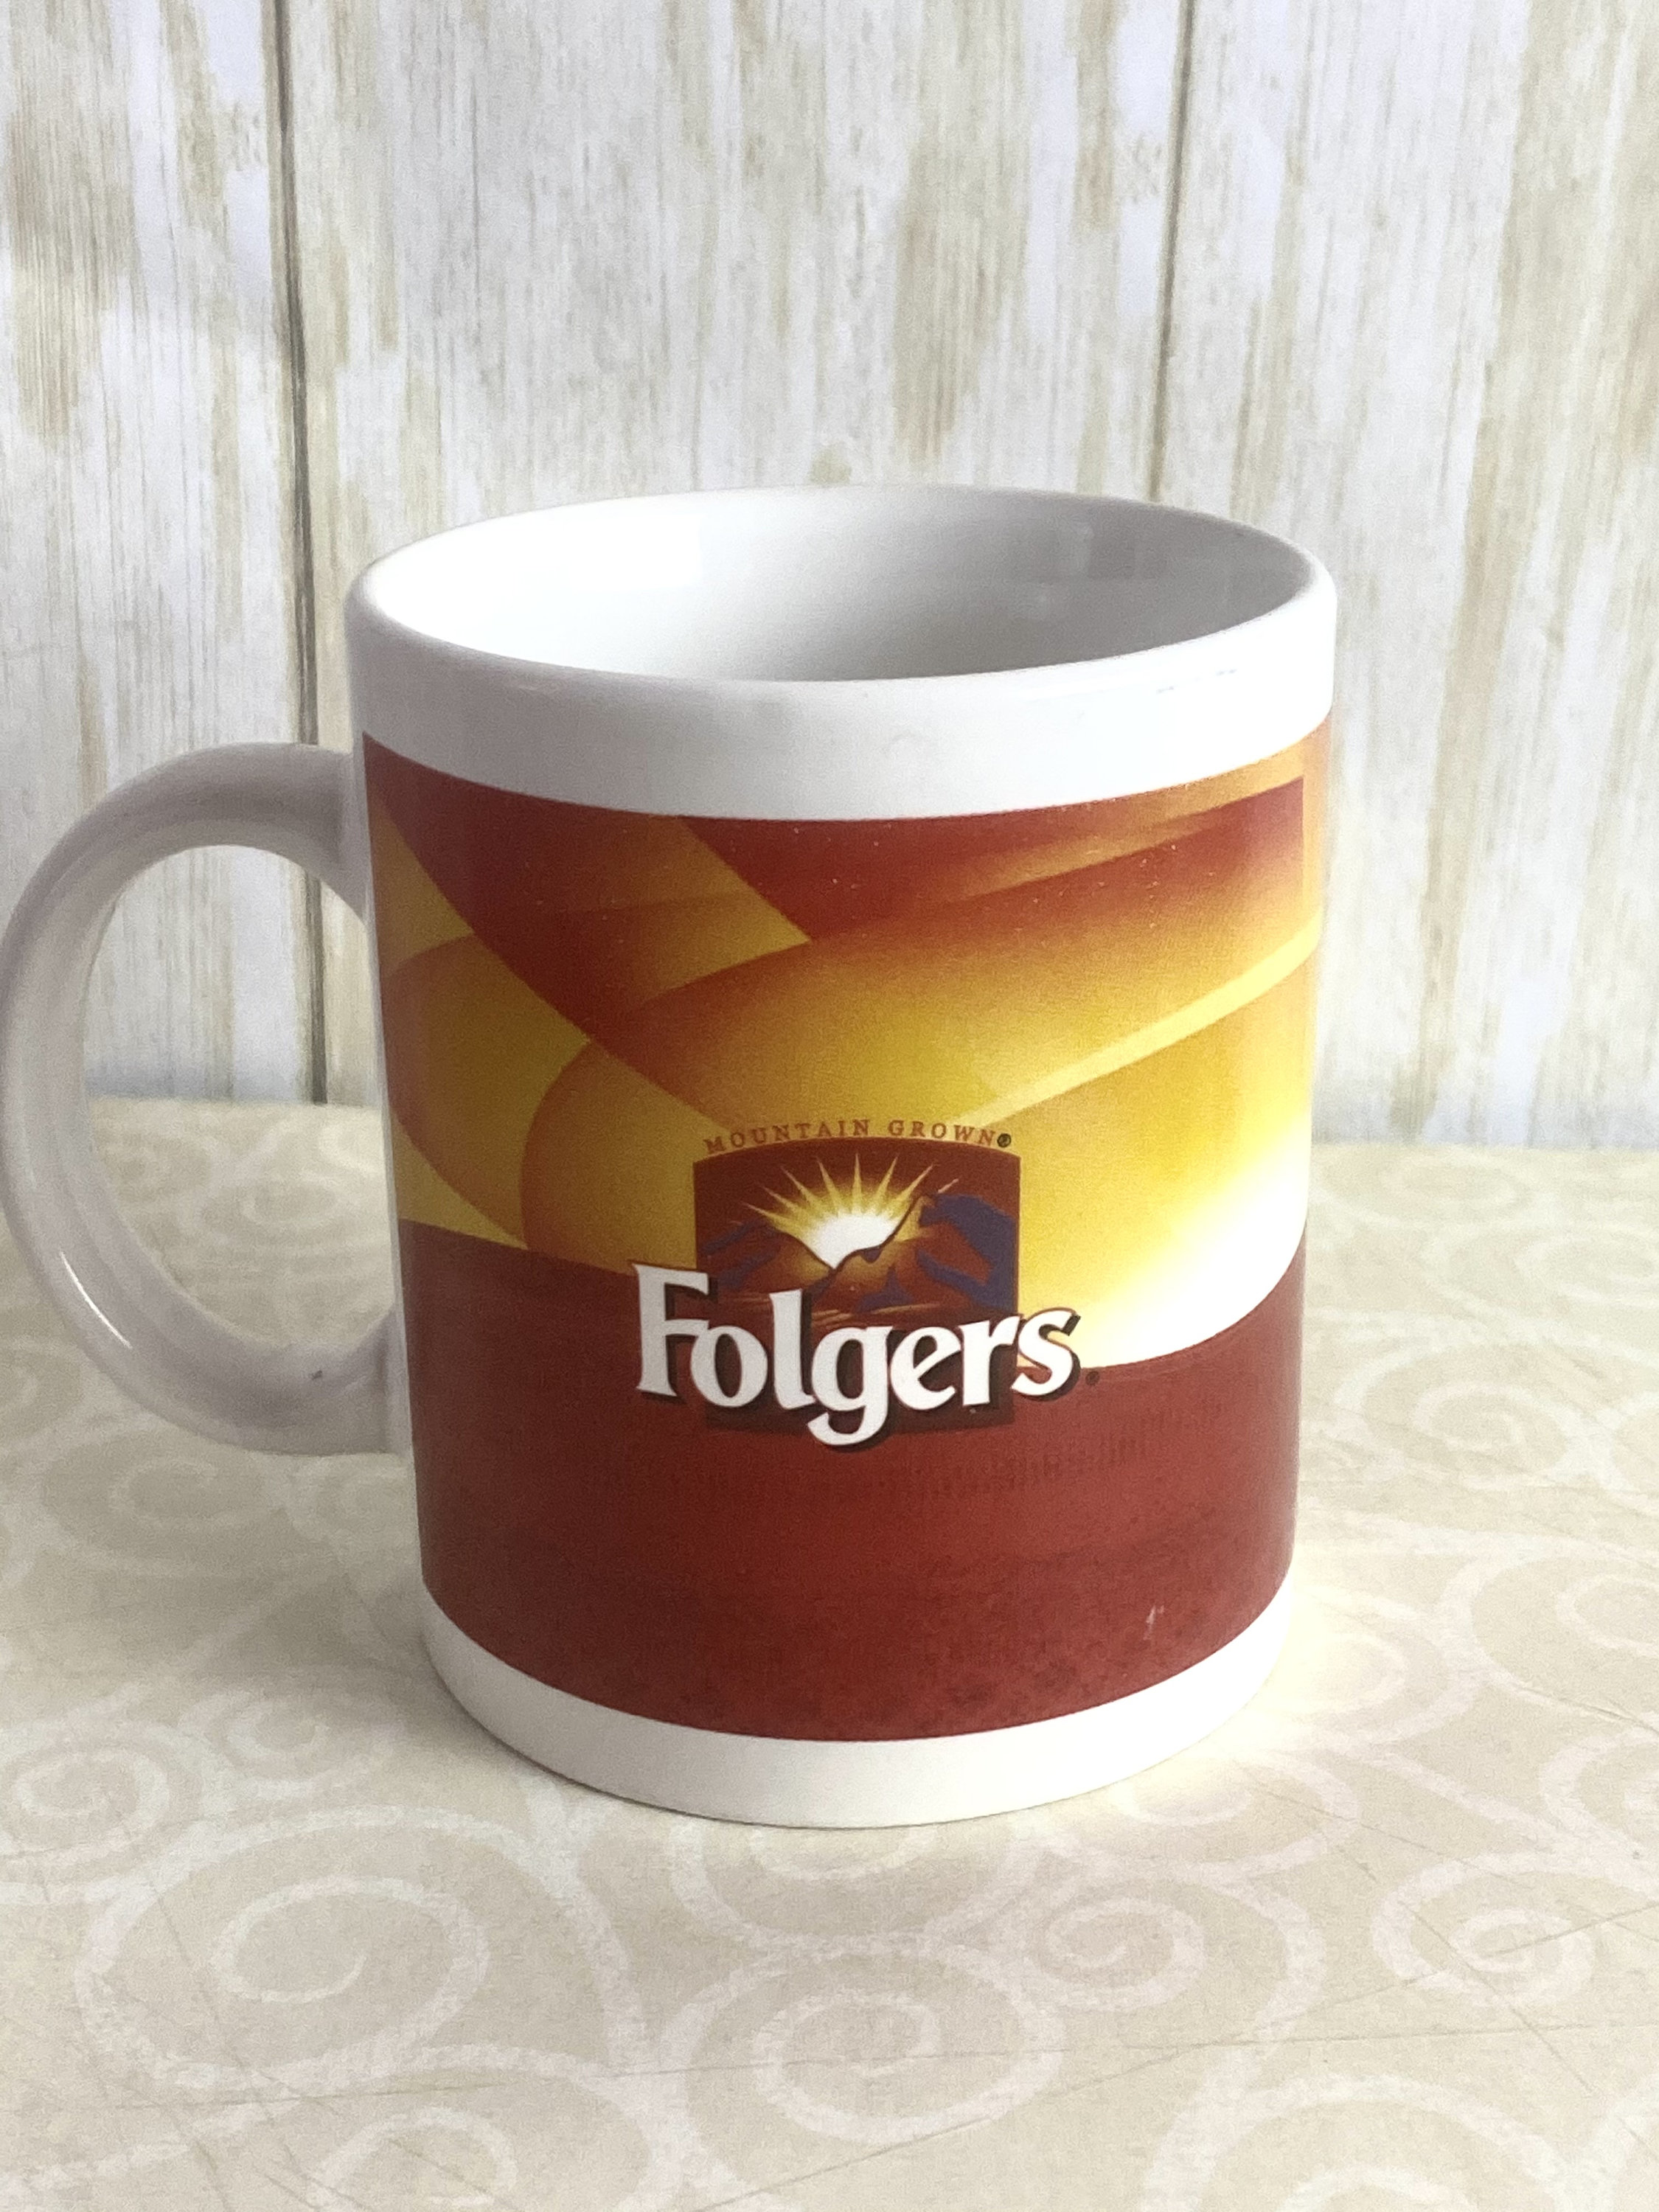 Set of 4 New in Box Roadside Diner Coffee Mugs by L. Godinger and Co.retro  